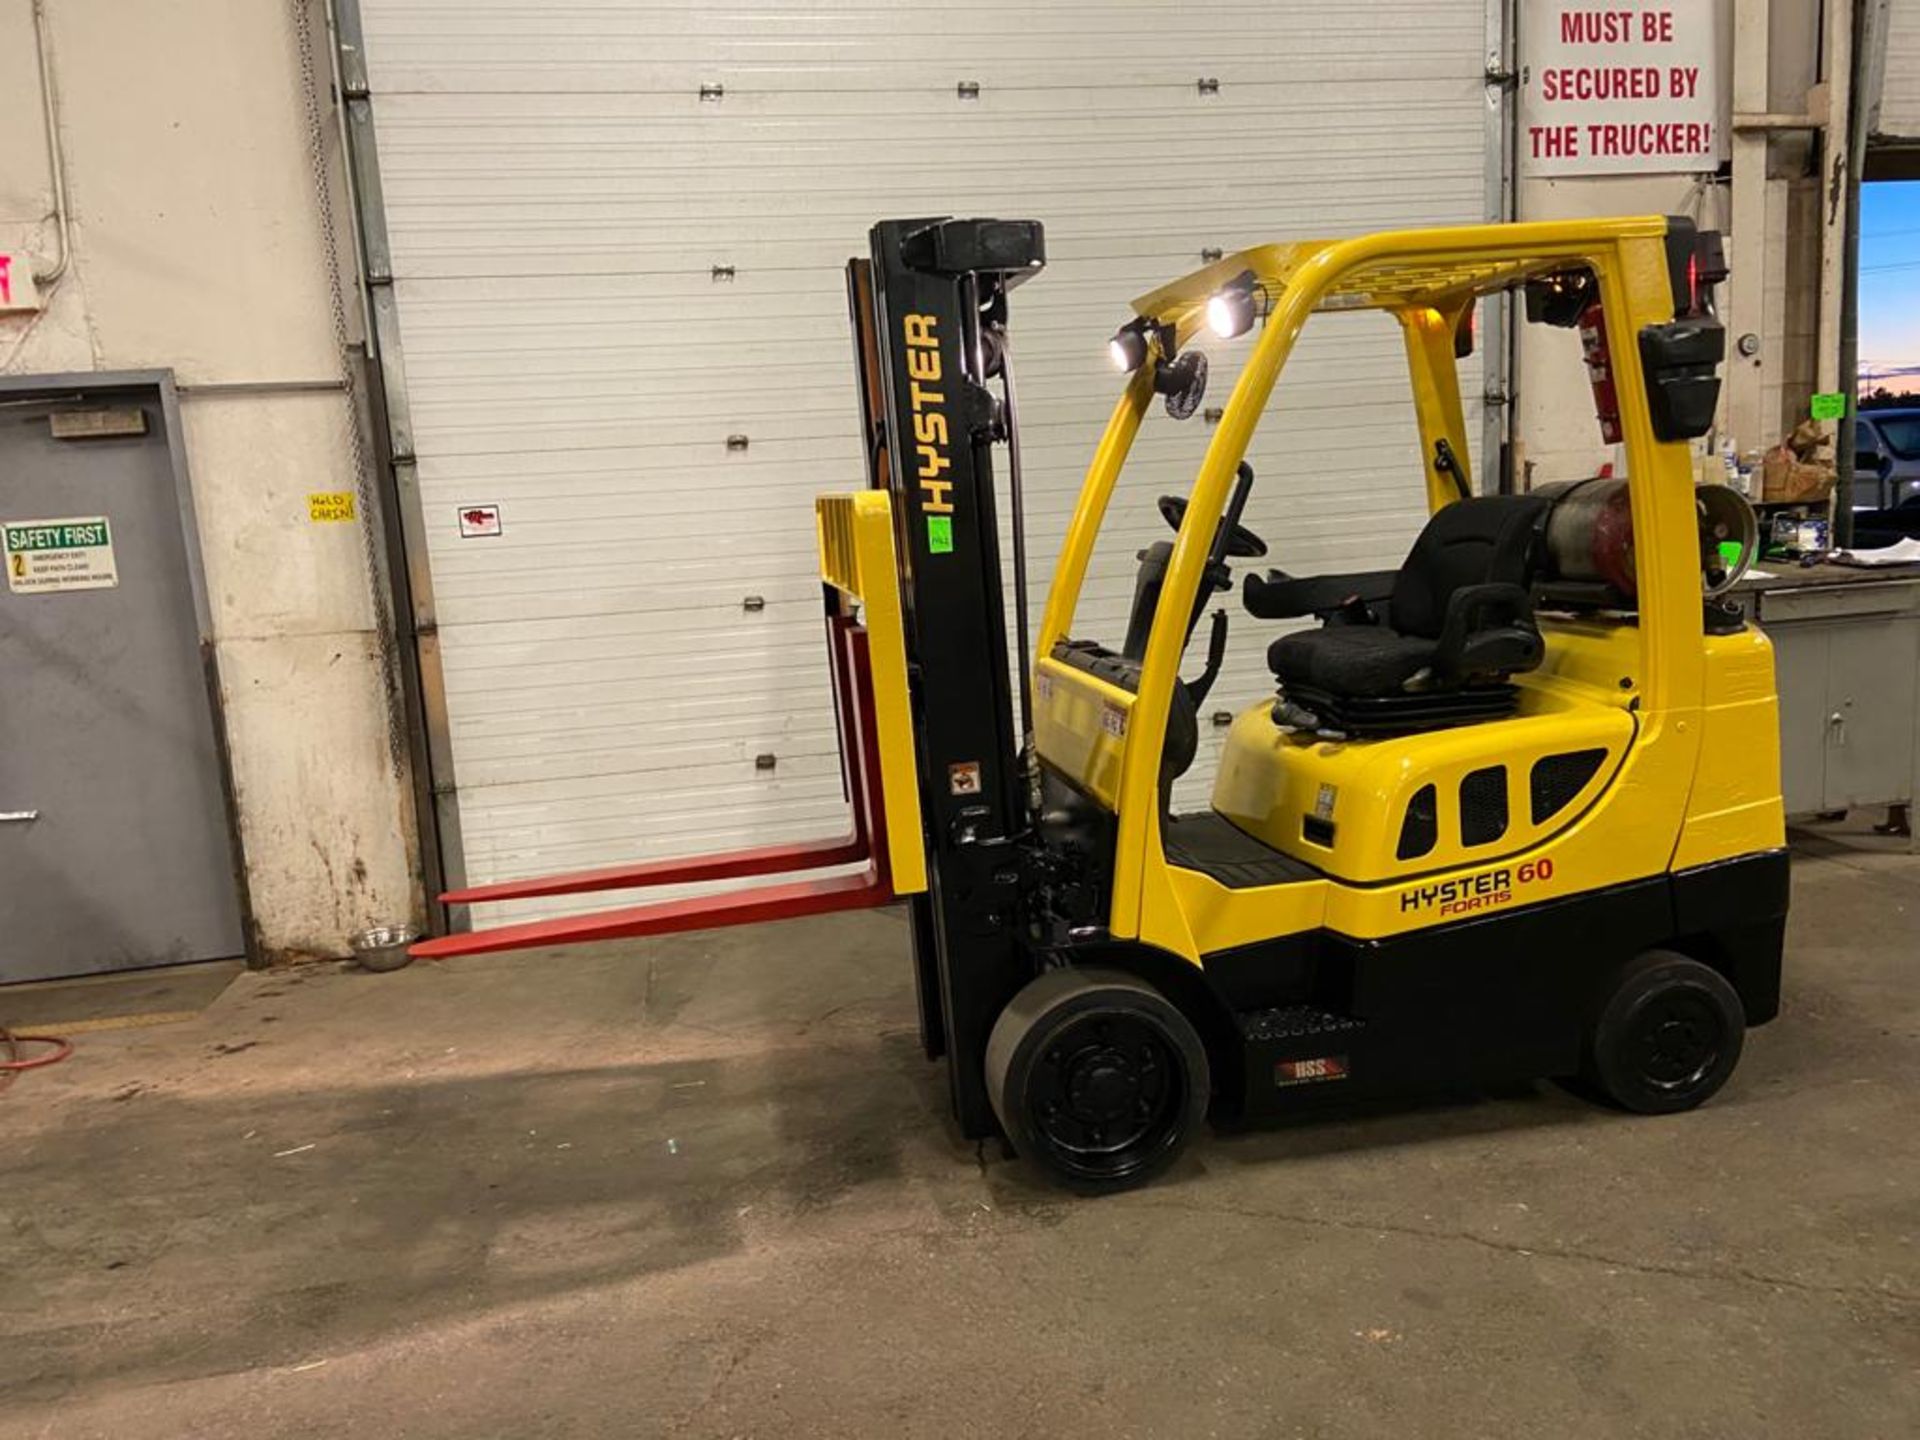 FREE CUSTOMS - 2016 Hyster 6000lbs Capacity Forklift LPG (propane) with 3-STAGE MAST (propane tank